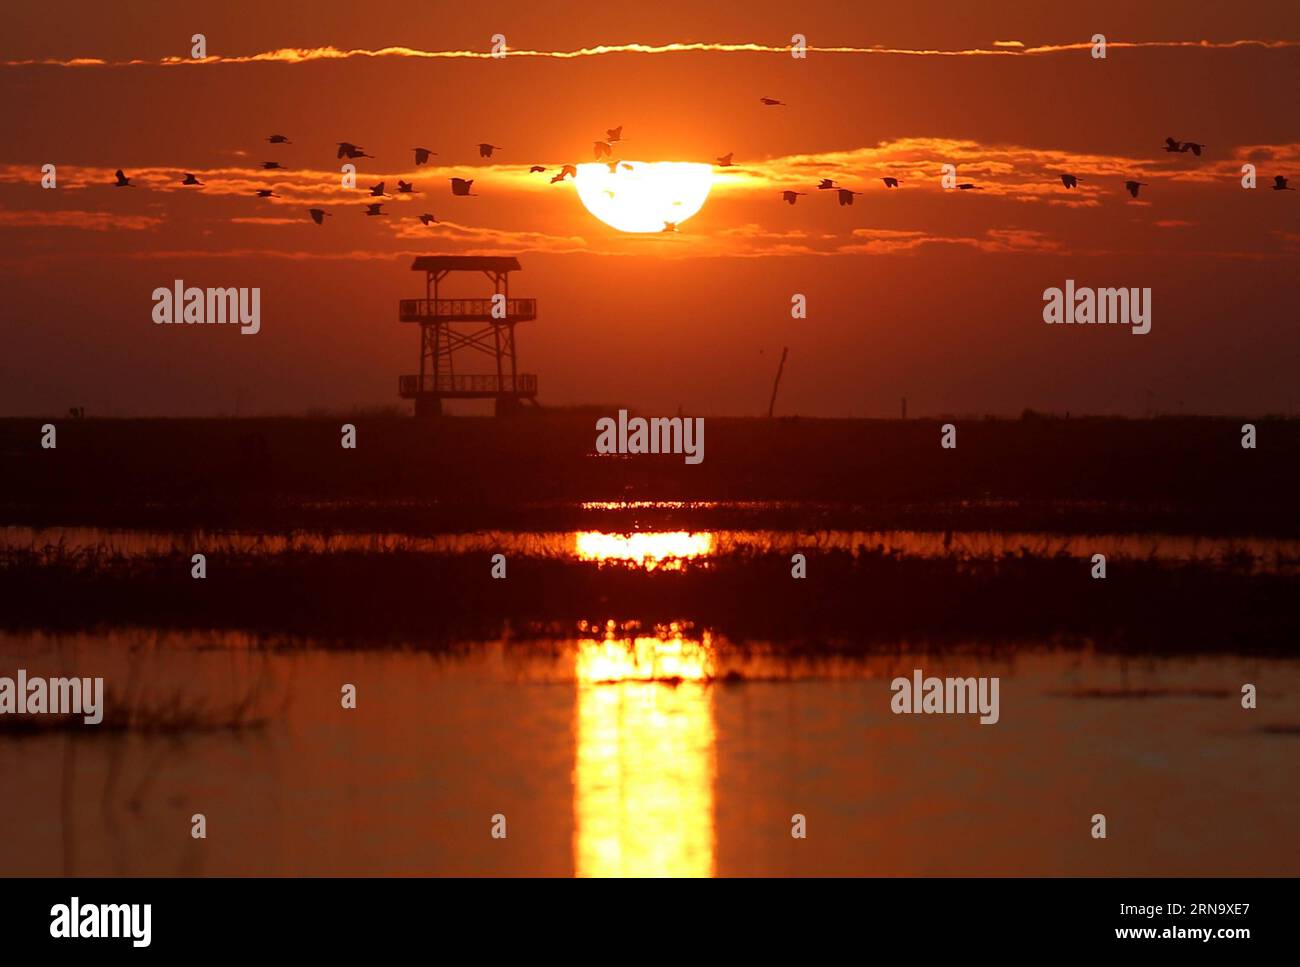 (151223) -- BAGO, Dec. 23, 2015 -- Photo taken on Dec. 23, 2015 shows birds flying over Moeyungyi Wetland Wildlife Sanctuary in Bago region, Myanmar. Moeyungyi Wetlands is situated in Bago Division. Every year, millions of birds usually fly from the northern hemisphere to the south along the East-Asian Australian Flyway to escape from winter. They stop to rest and feed in Asia. So the flyway contains a network of wetlands and Moeyungyi is one of which could cooperate to certain migrated as well as domestic birds. ) MYANMAR-BAGO-WETLAND-WILDLIFE UxAung PUBLICATIONxNOTxINxCHN   151223 Bago DEC 2 Stock Photo